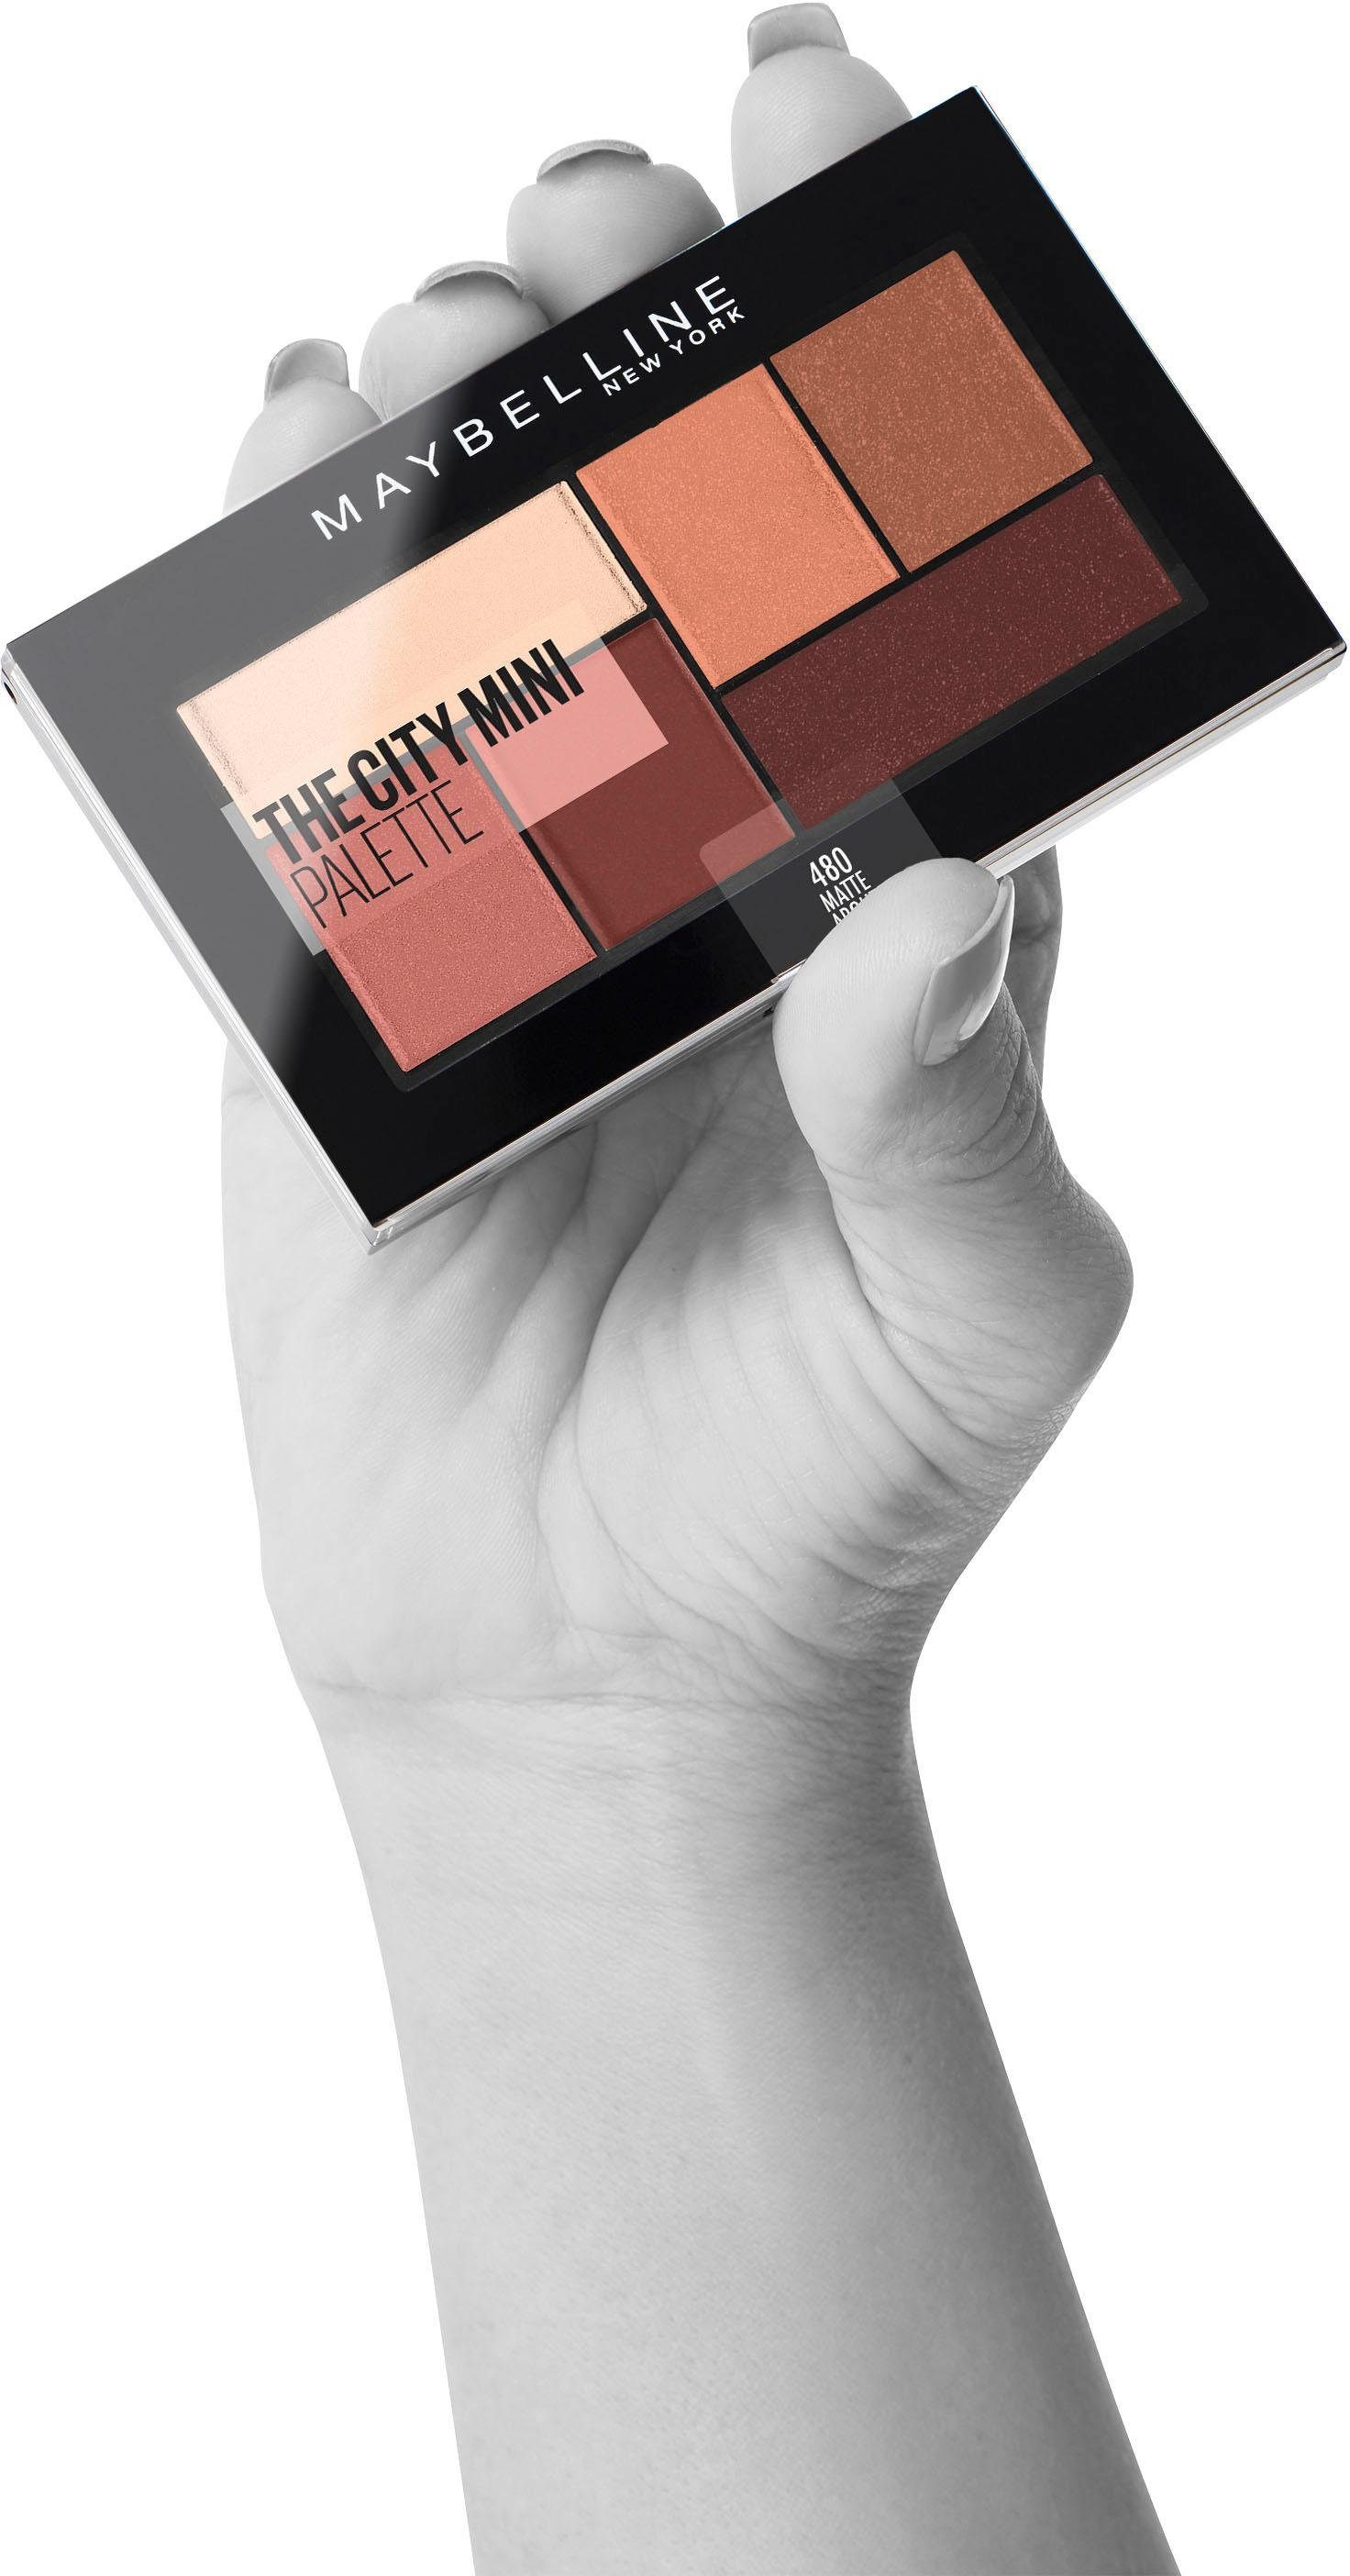 MAYBELLINE Lidschatten-Palette Matte Mini, City The NEW About Town YORK